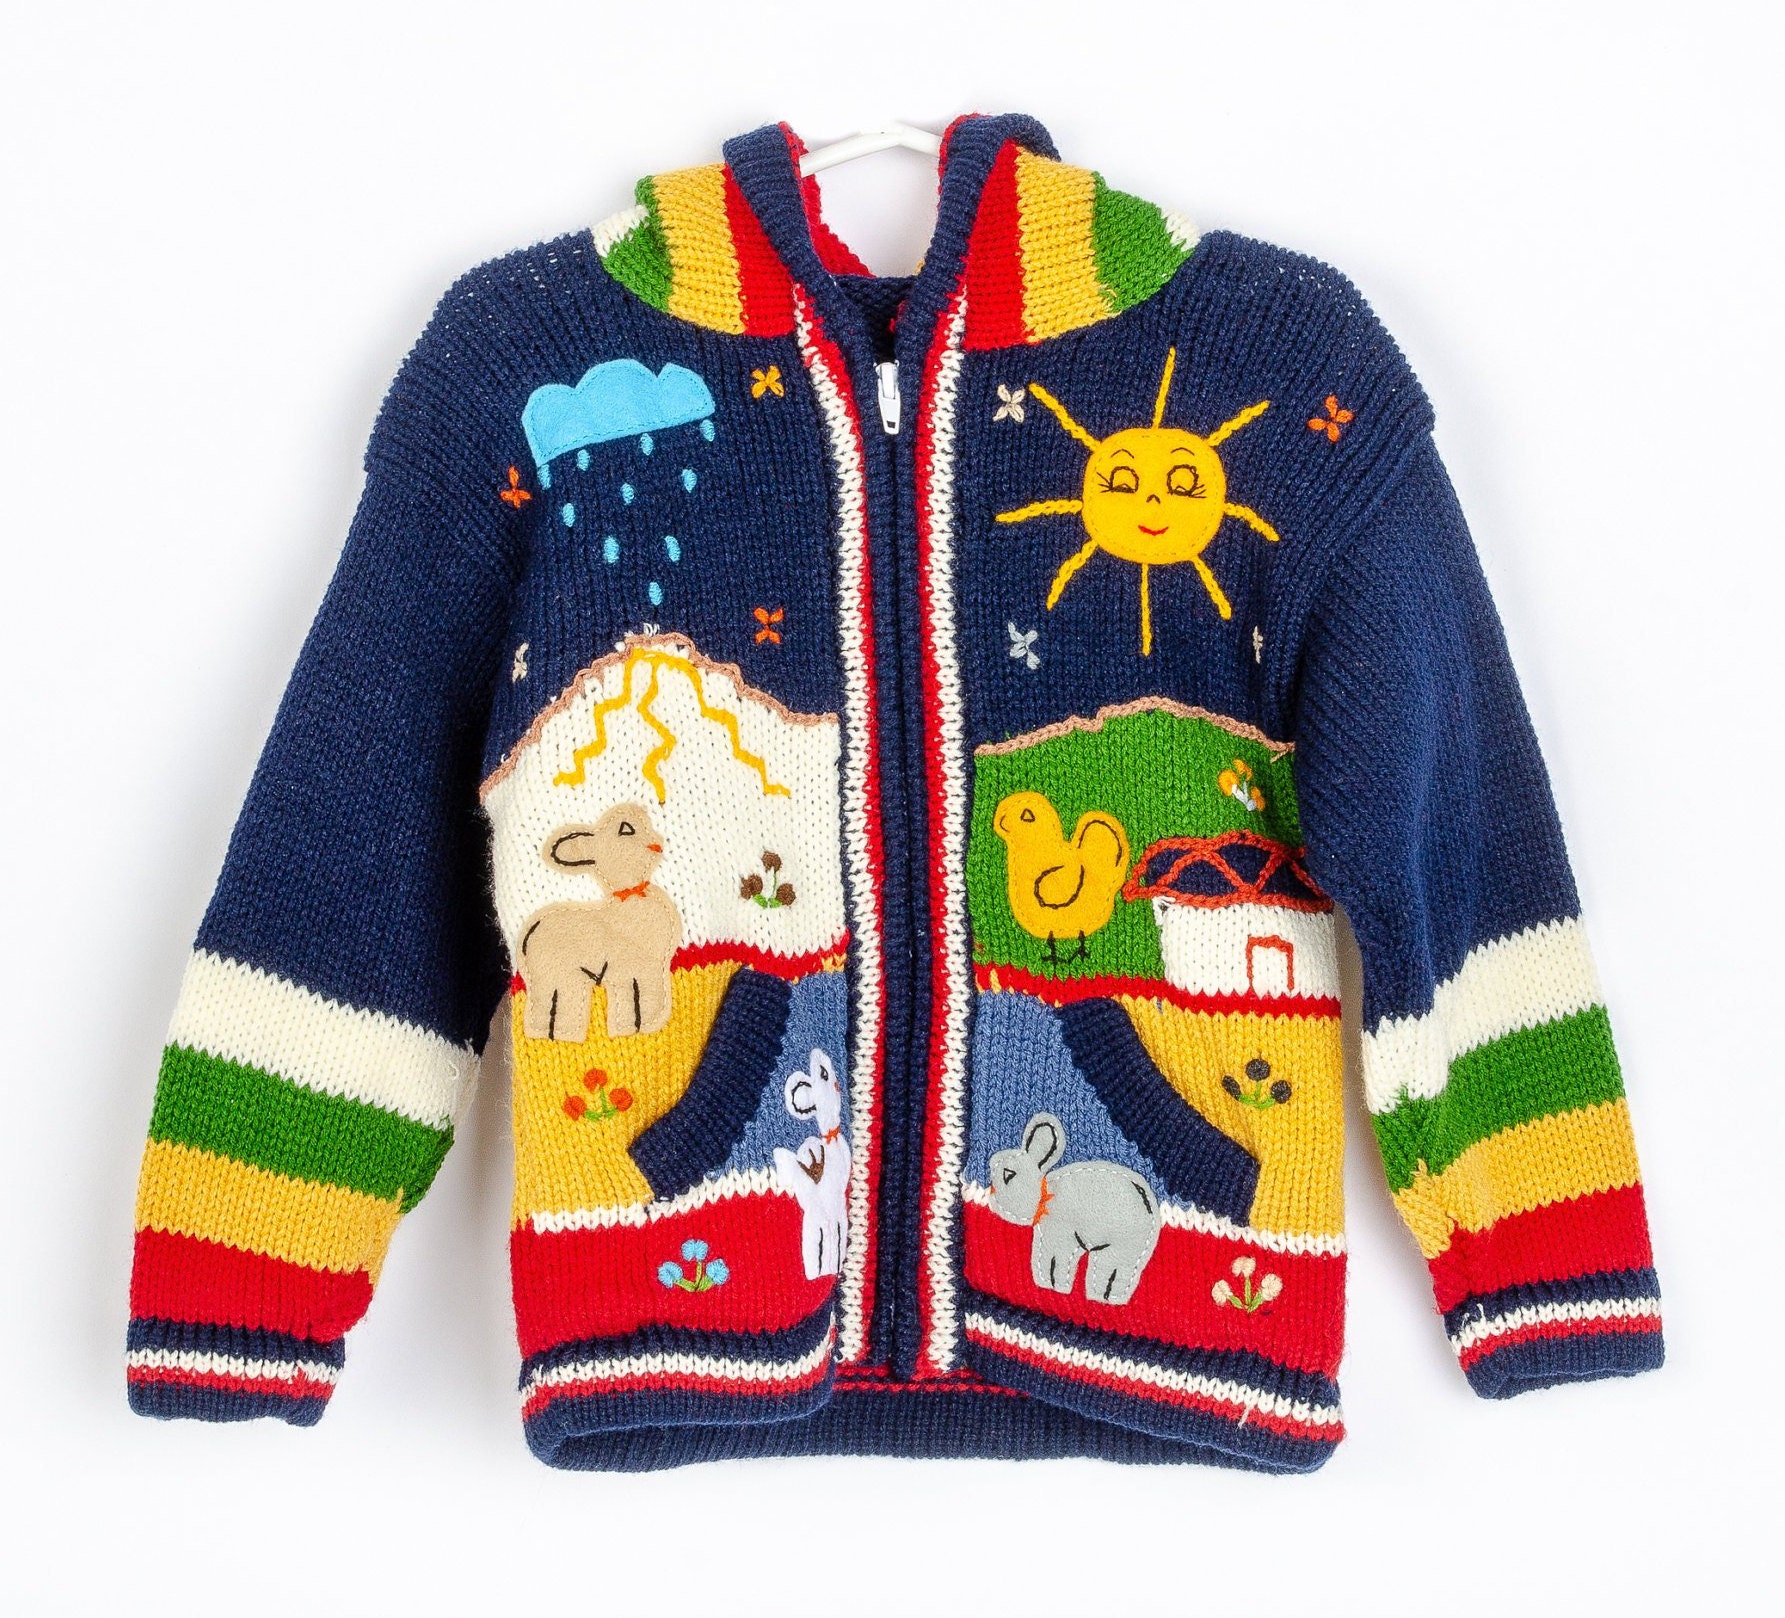 Children knitted sweater with colorful embroidered animals | Etsy